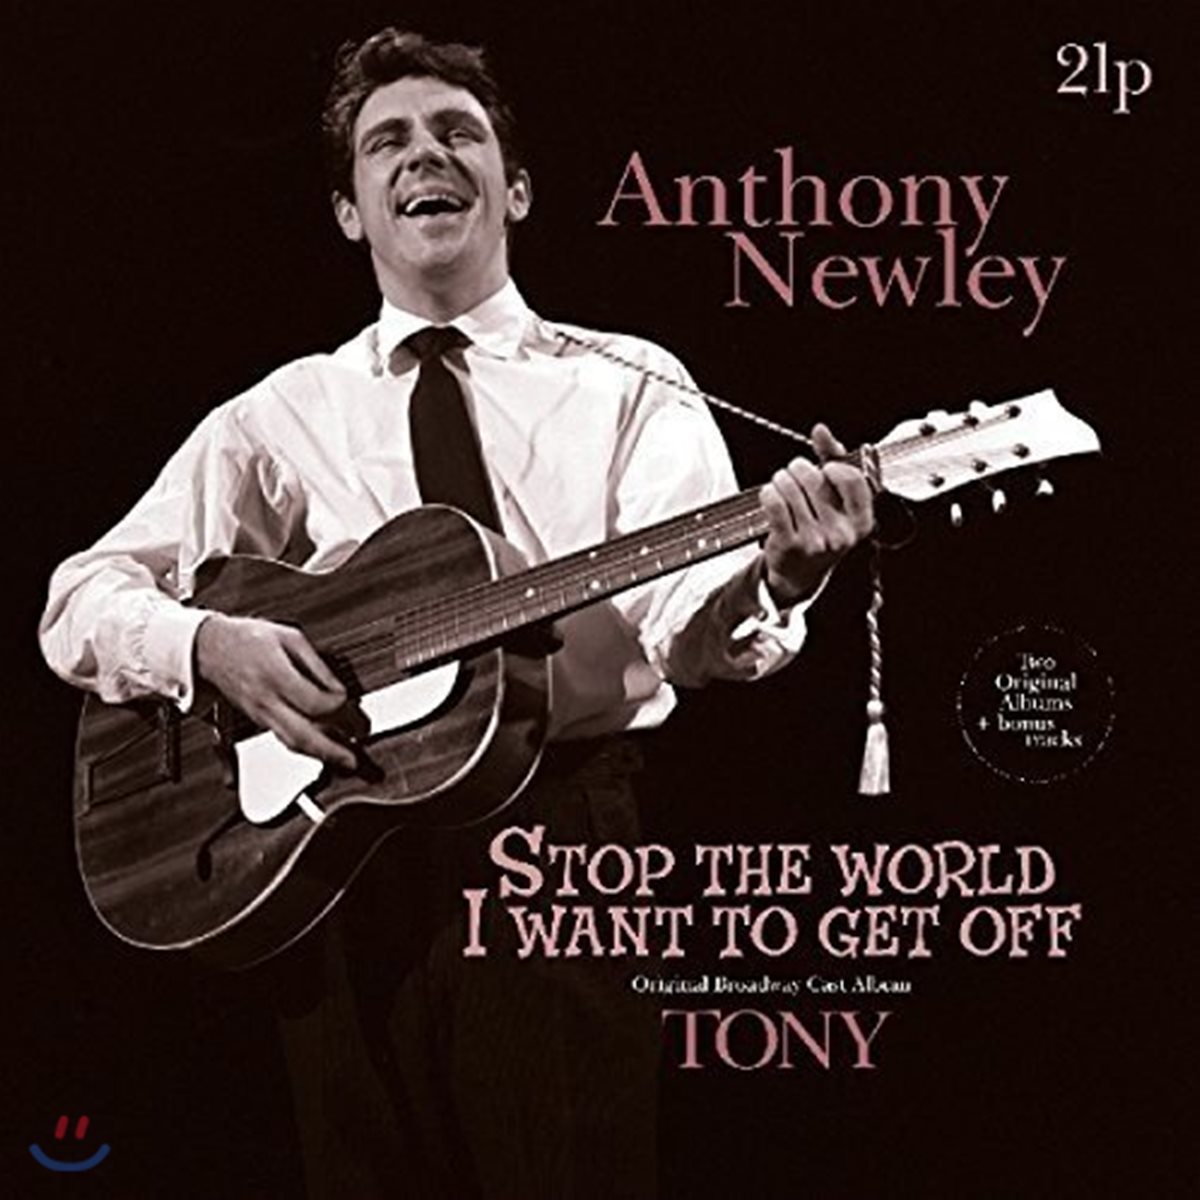 Anthony Newley (앤서니 뉴리) - Stop the World: I Want To Get Off/Tony [2 LP]